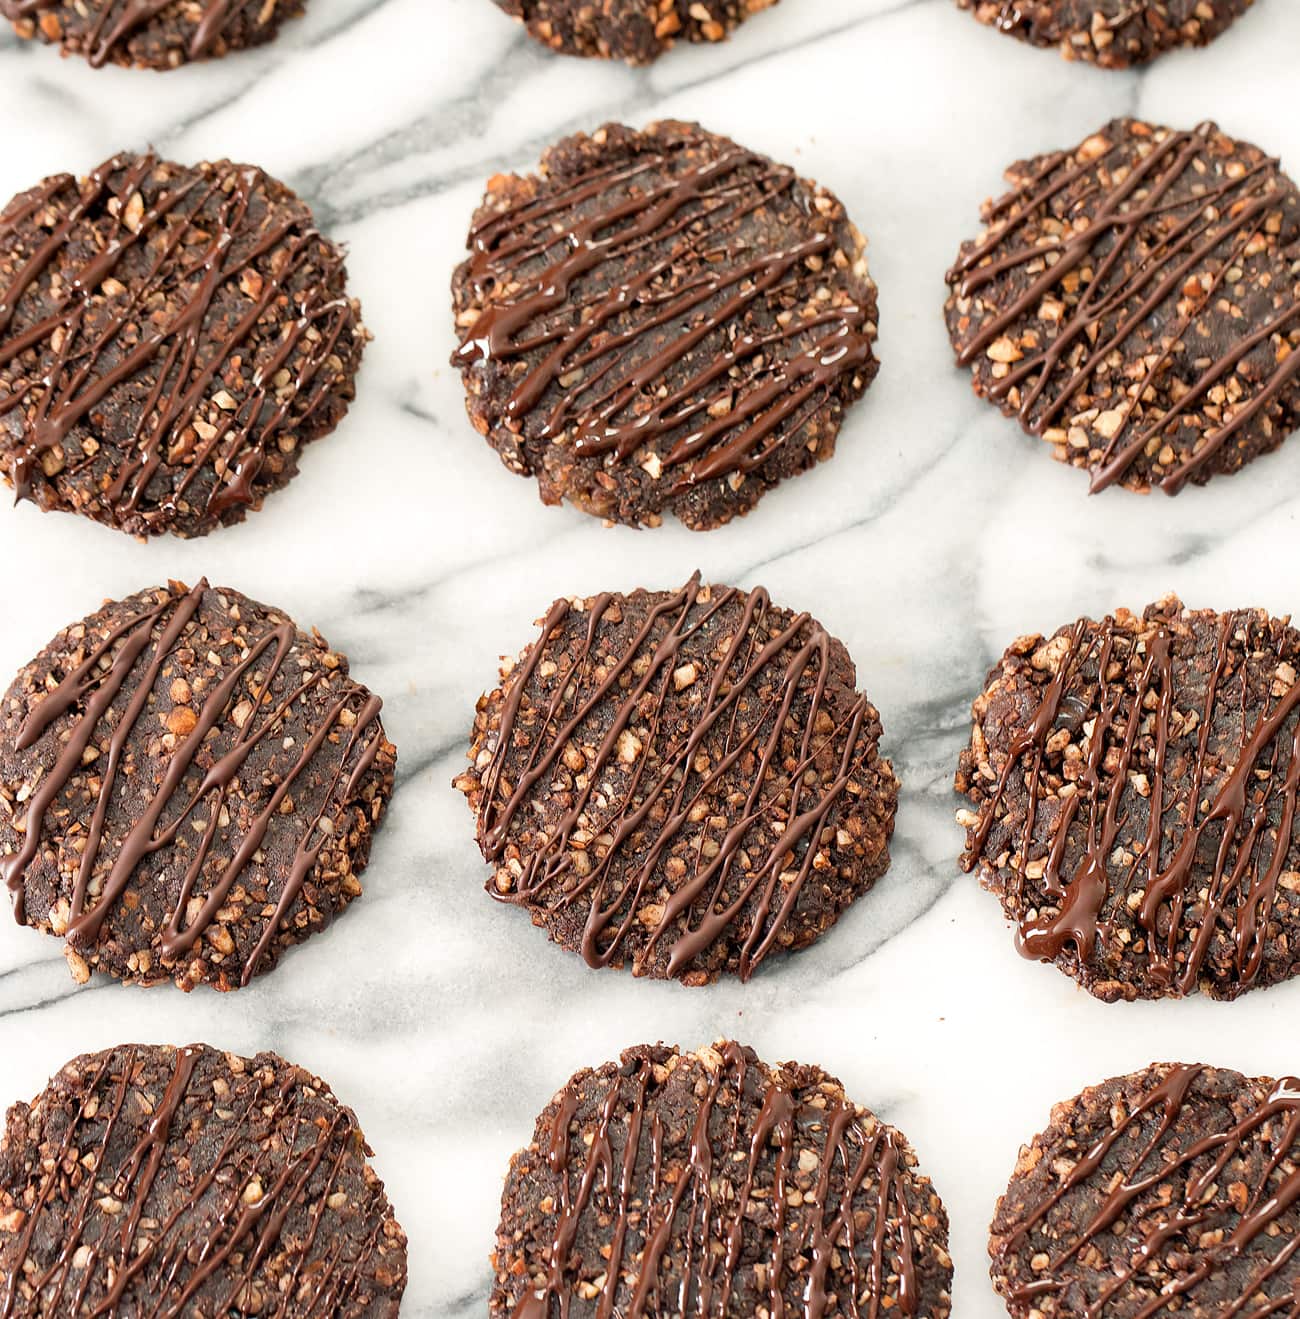 3 Ingredient Healthy No Bake Cookies (No Flour, Eggs, Butter or Refined